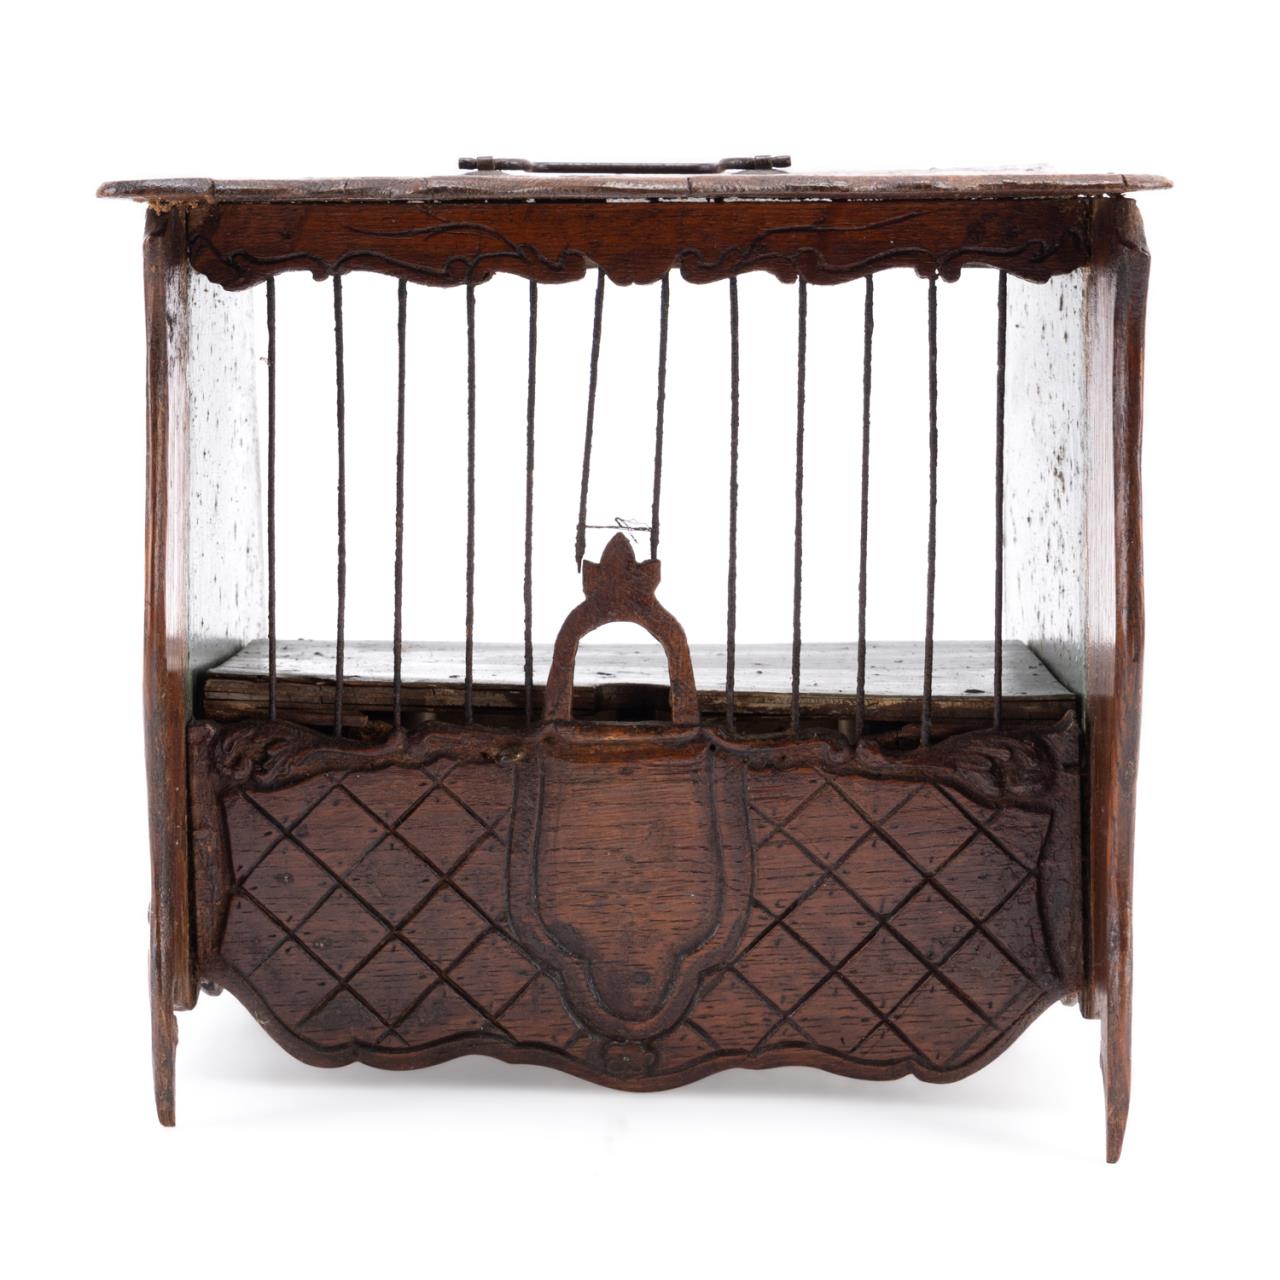 LOUIS XV STYLE CARVED WOODEN BIRDCAGE 3b3fcc